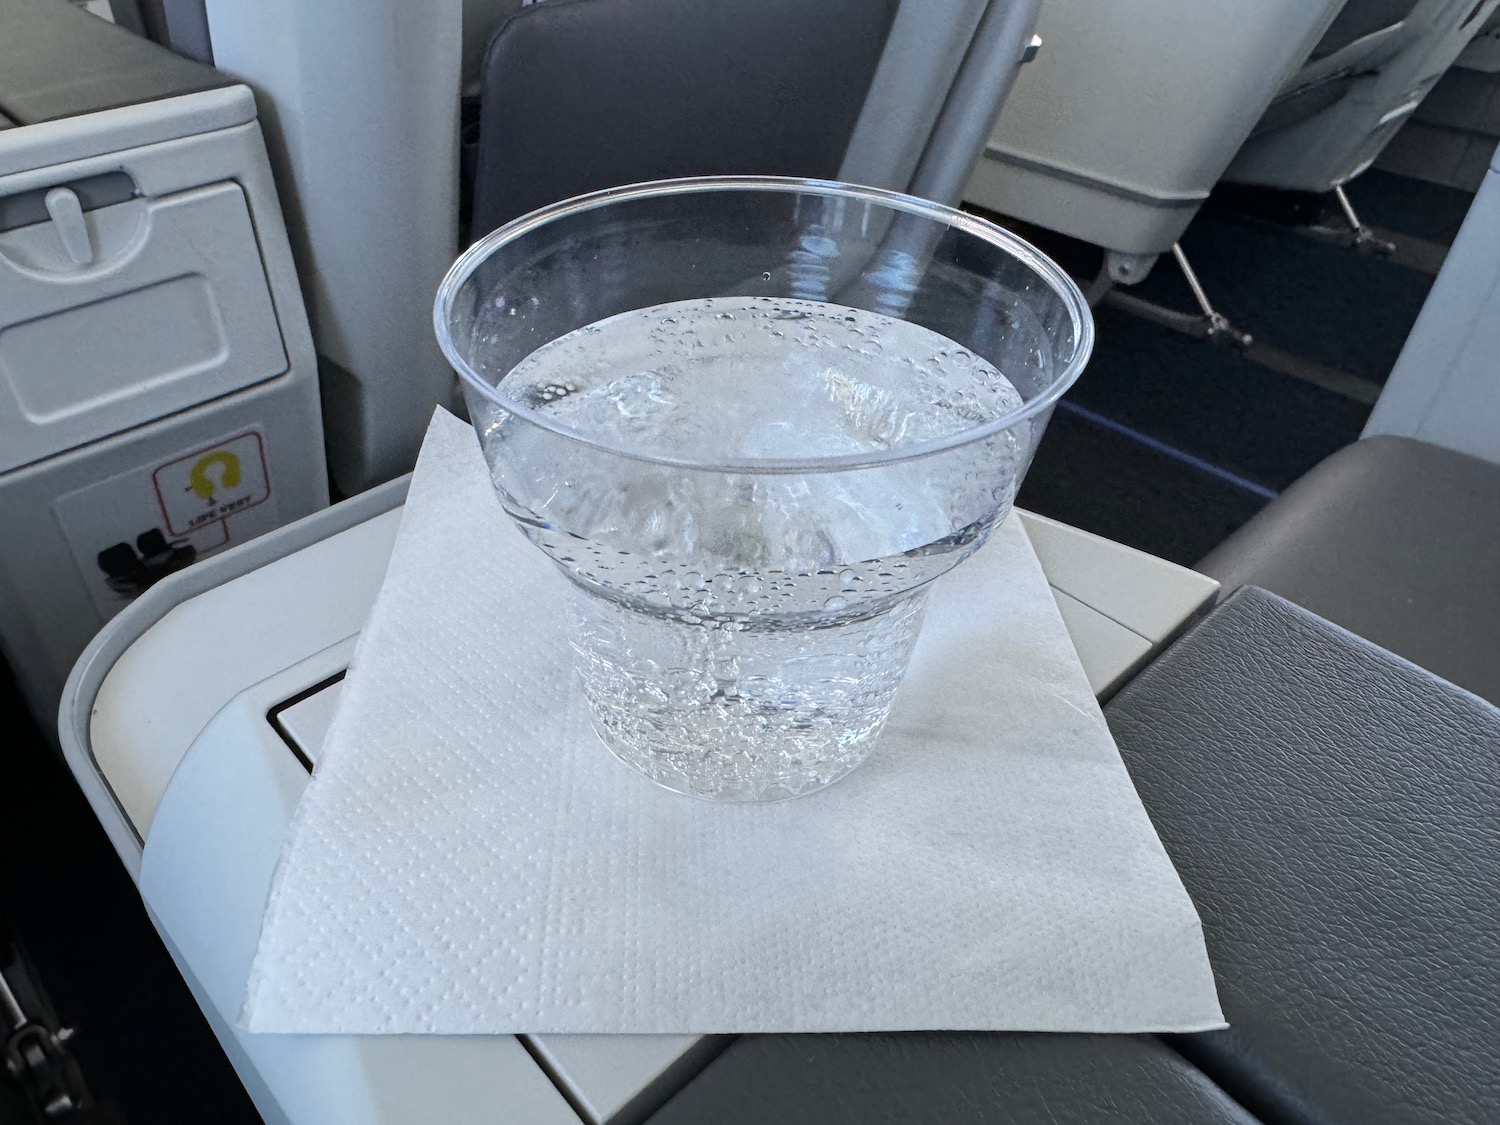 a clear plastic cup with ice on a napkin on a seat